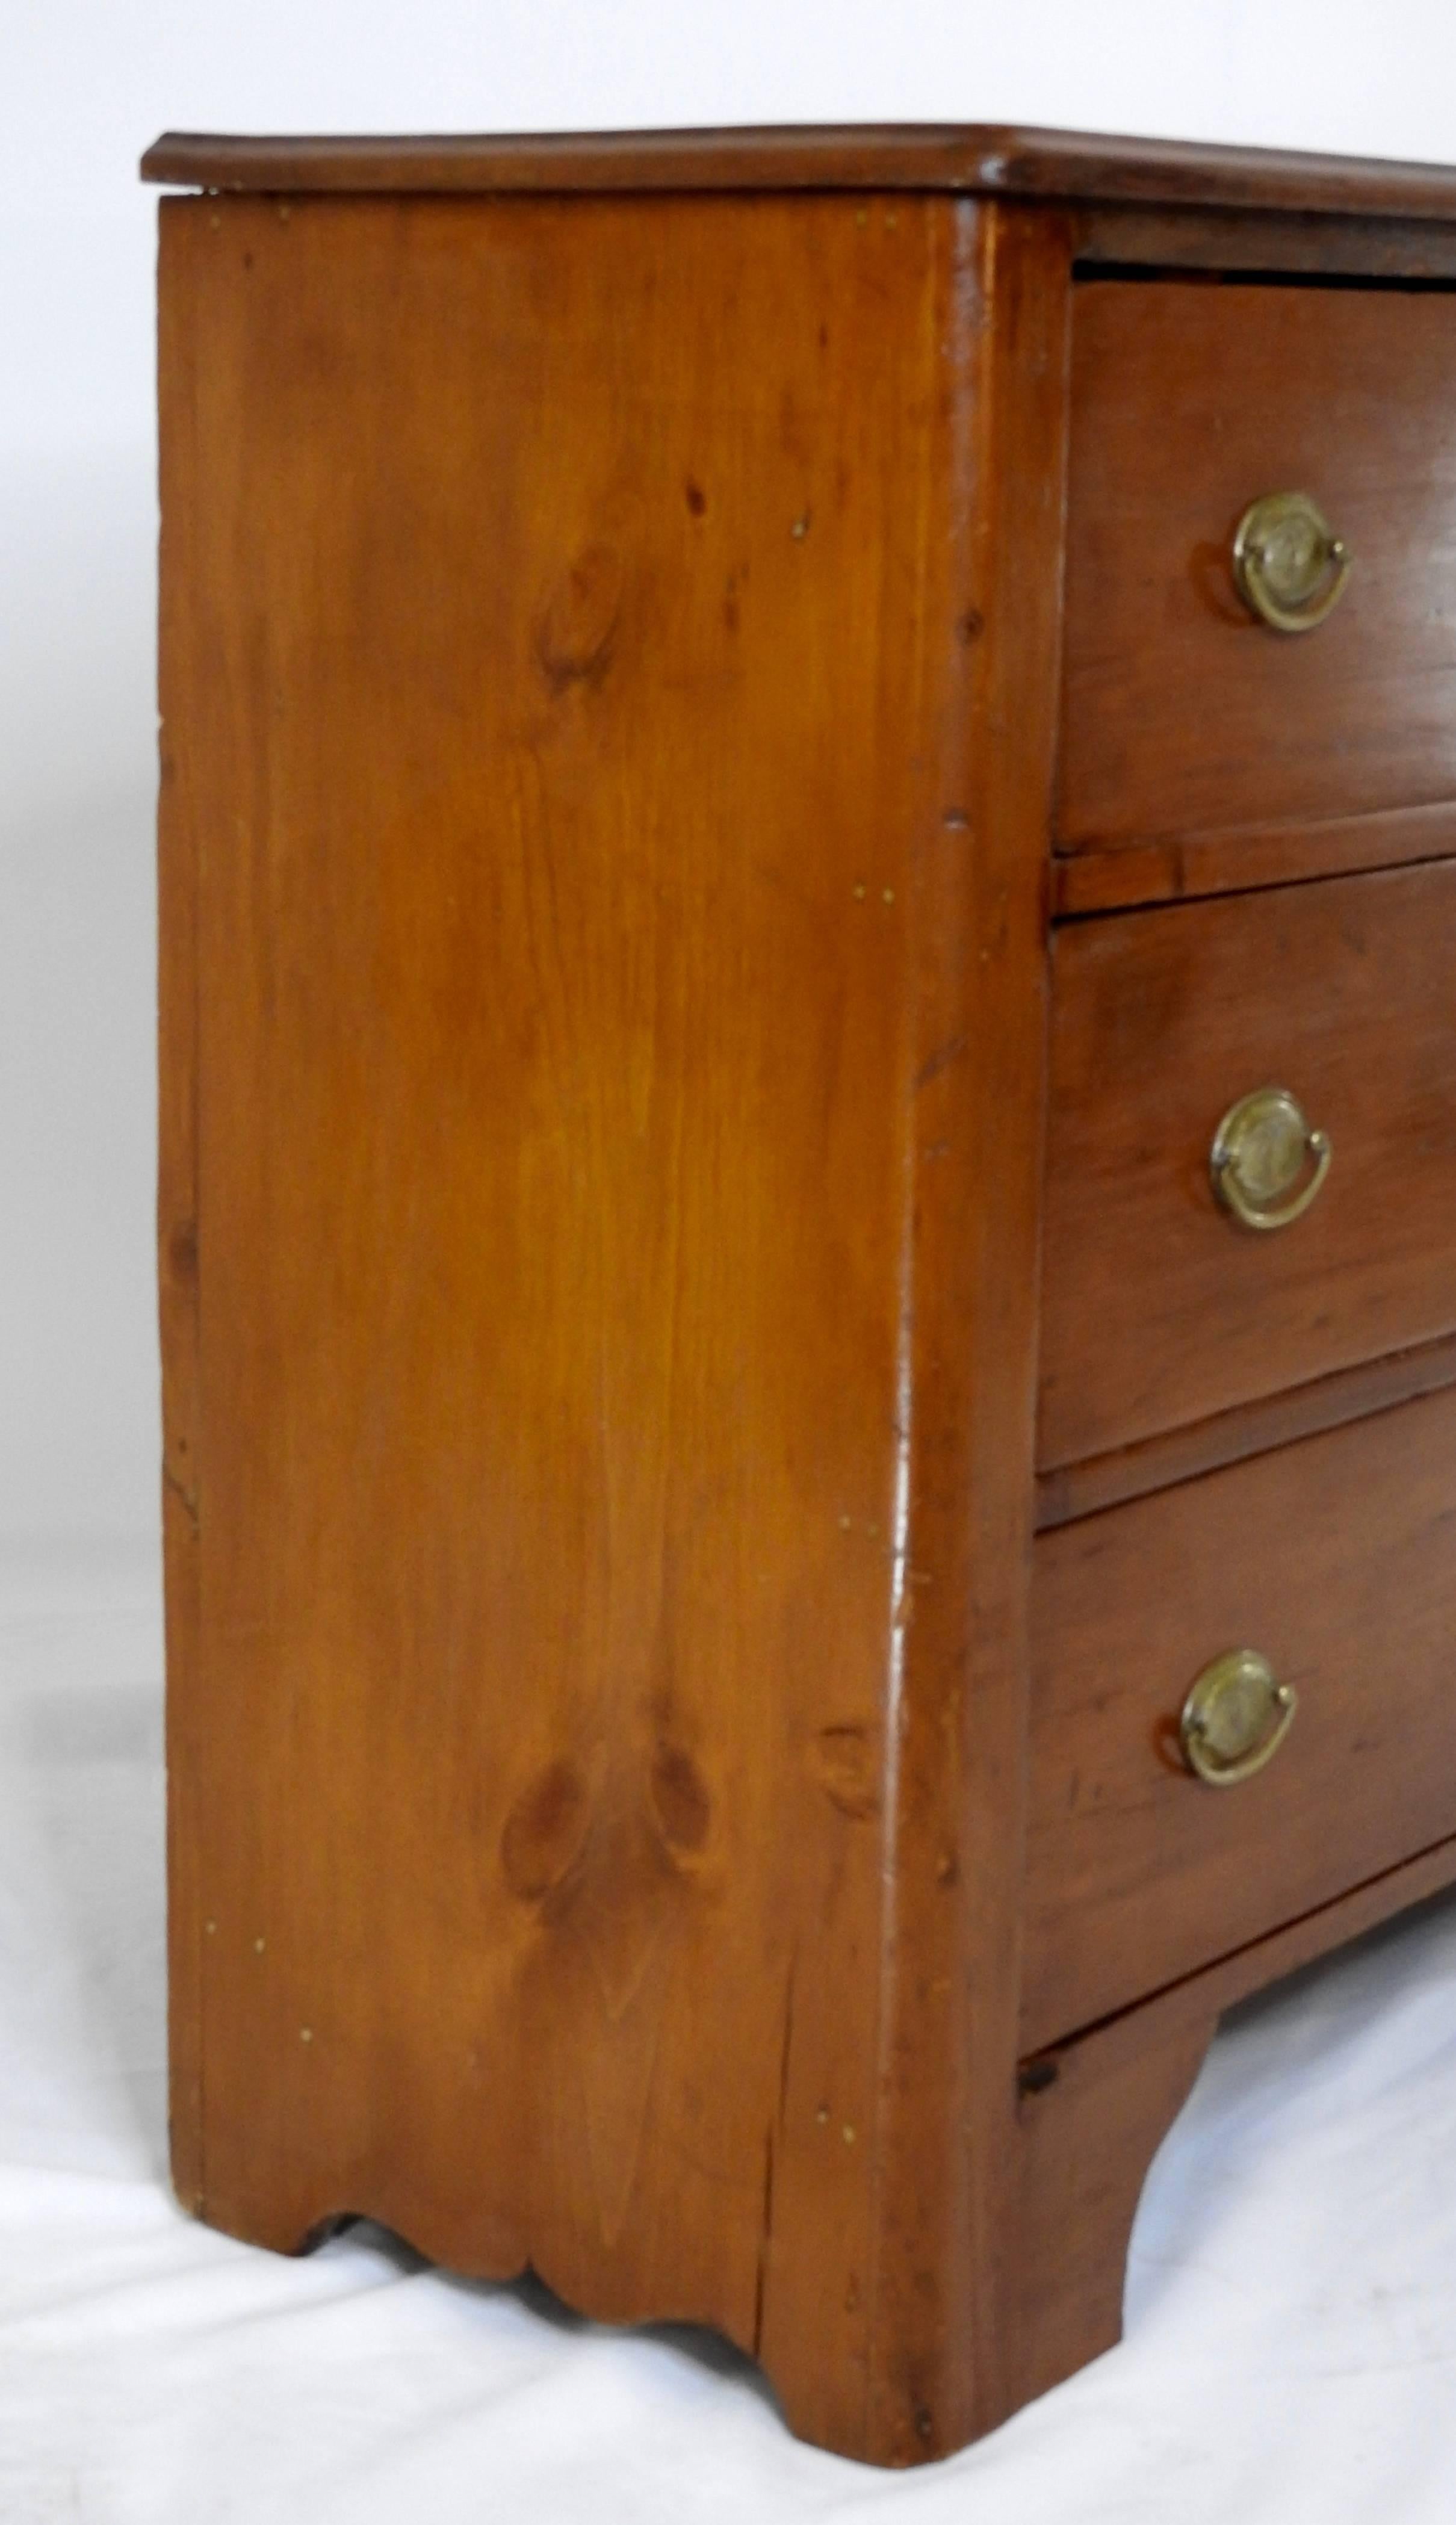 We are offering an antique American Federal style chest of drawers made in the 19th century. This cherry stained wooden chest of drawers features an overhanging edge top, three deep drawers with brass oval eagle motif pulls, keyhole accents and